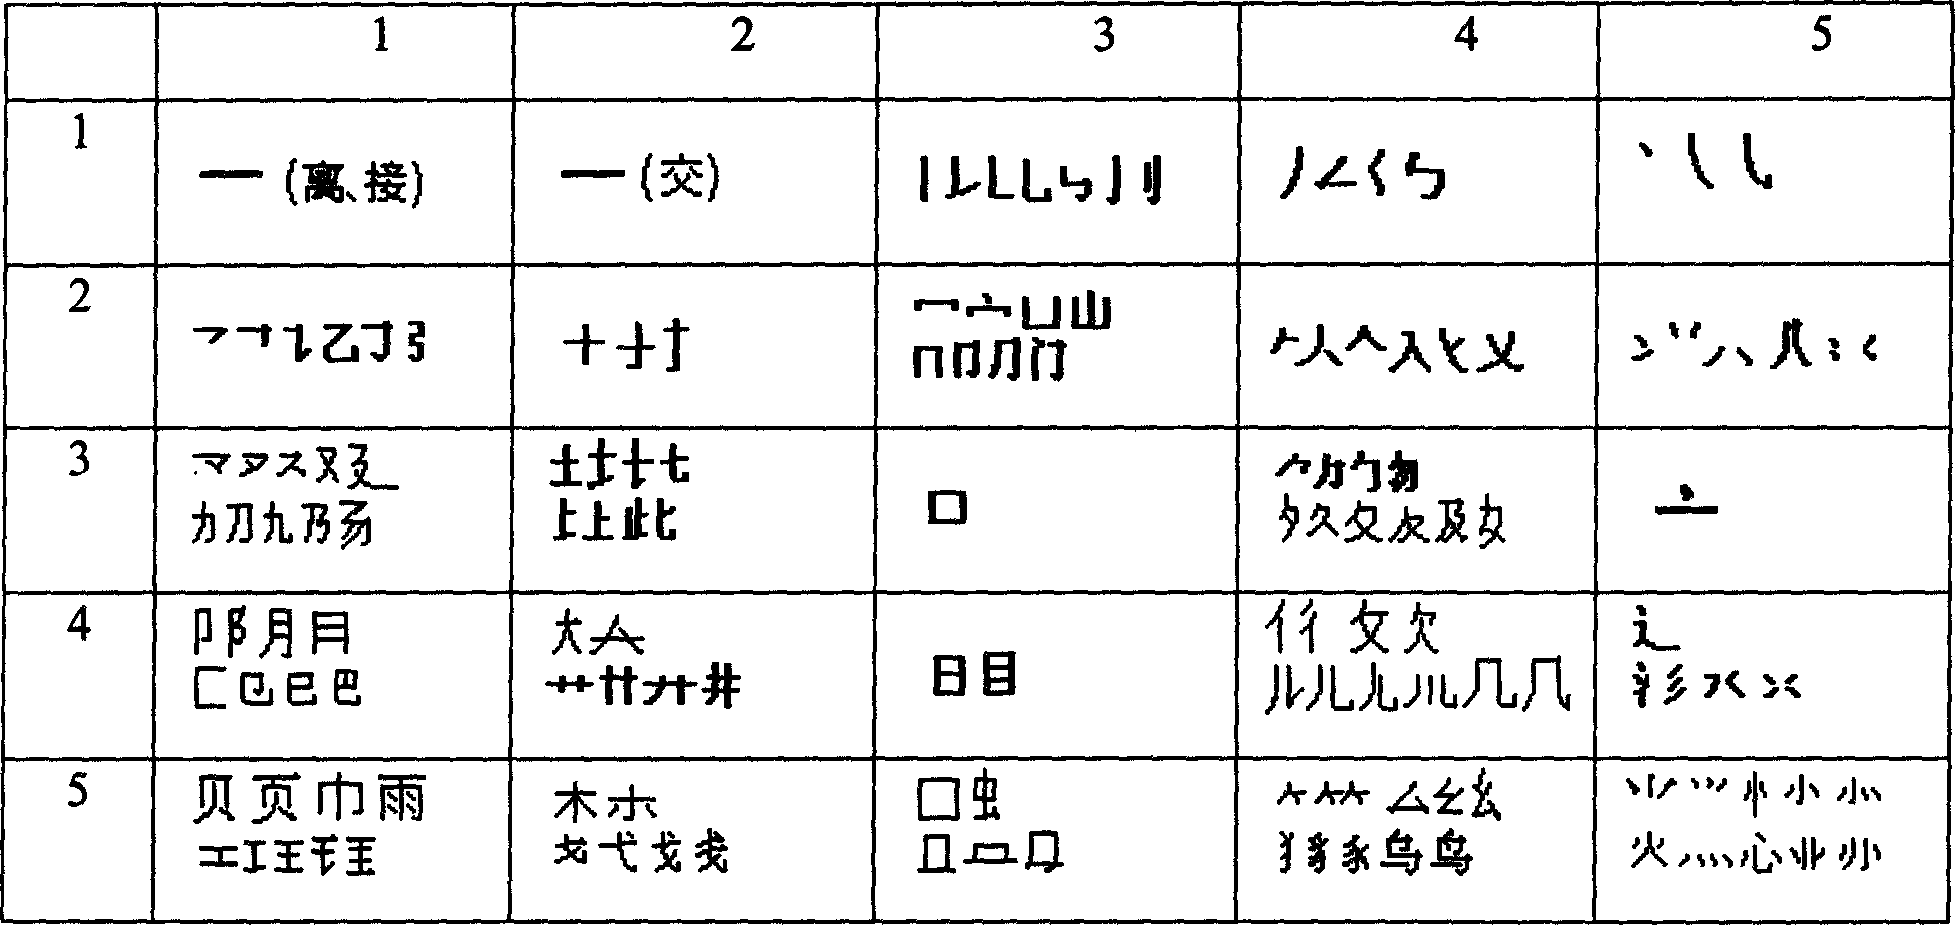 'He' code Chinese character numerical inputting method